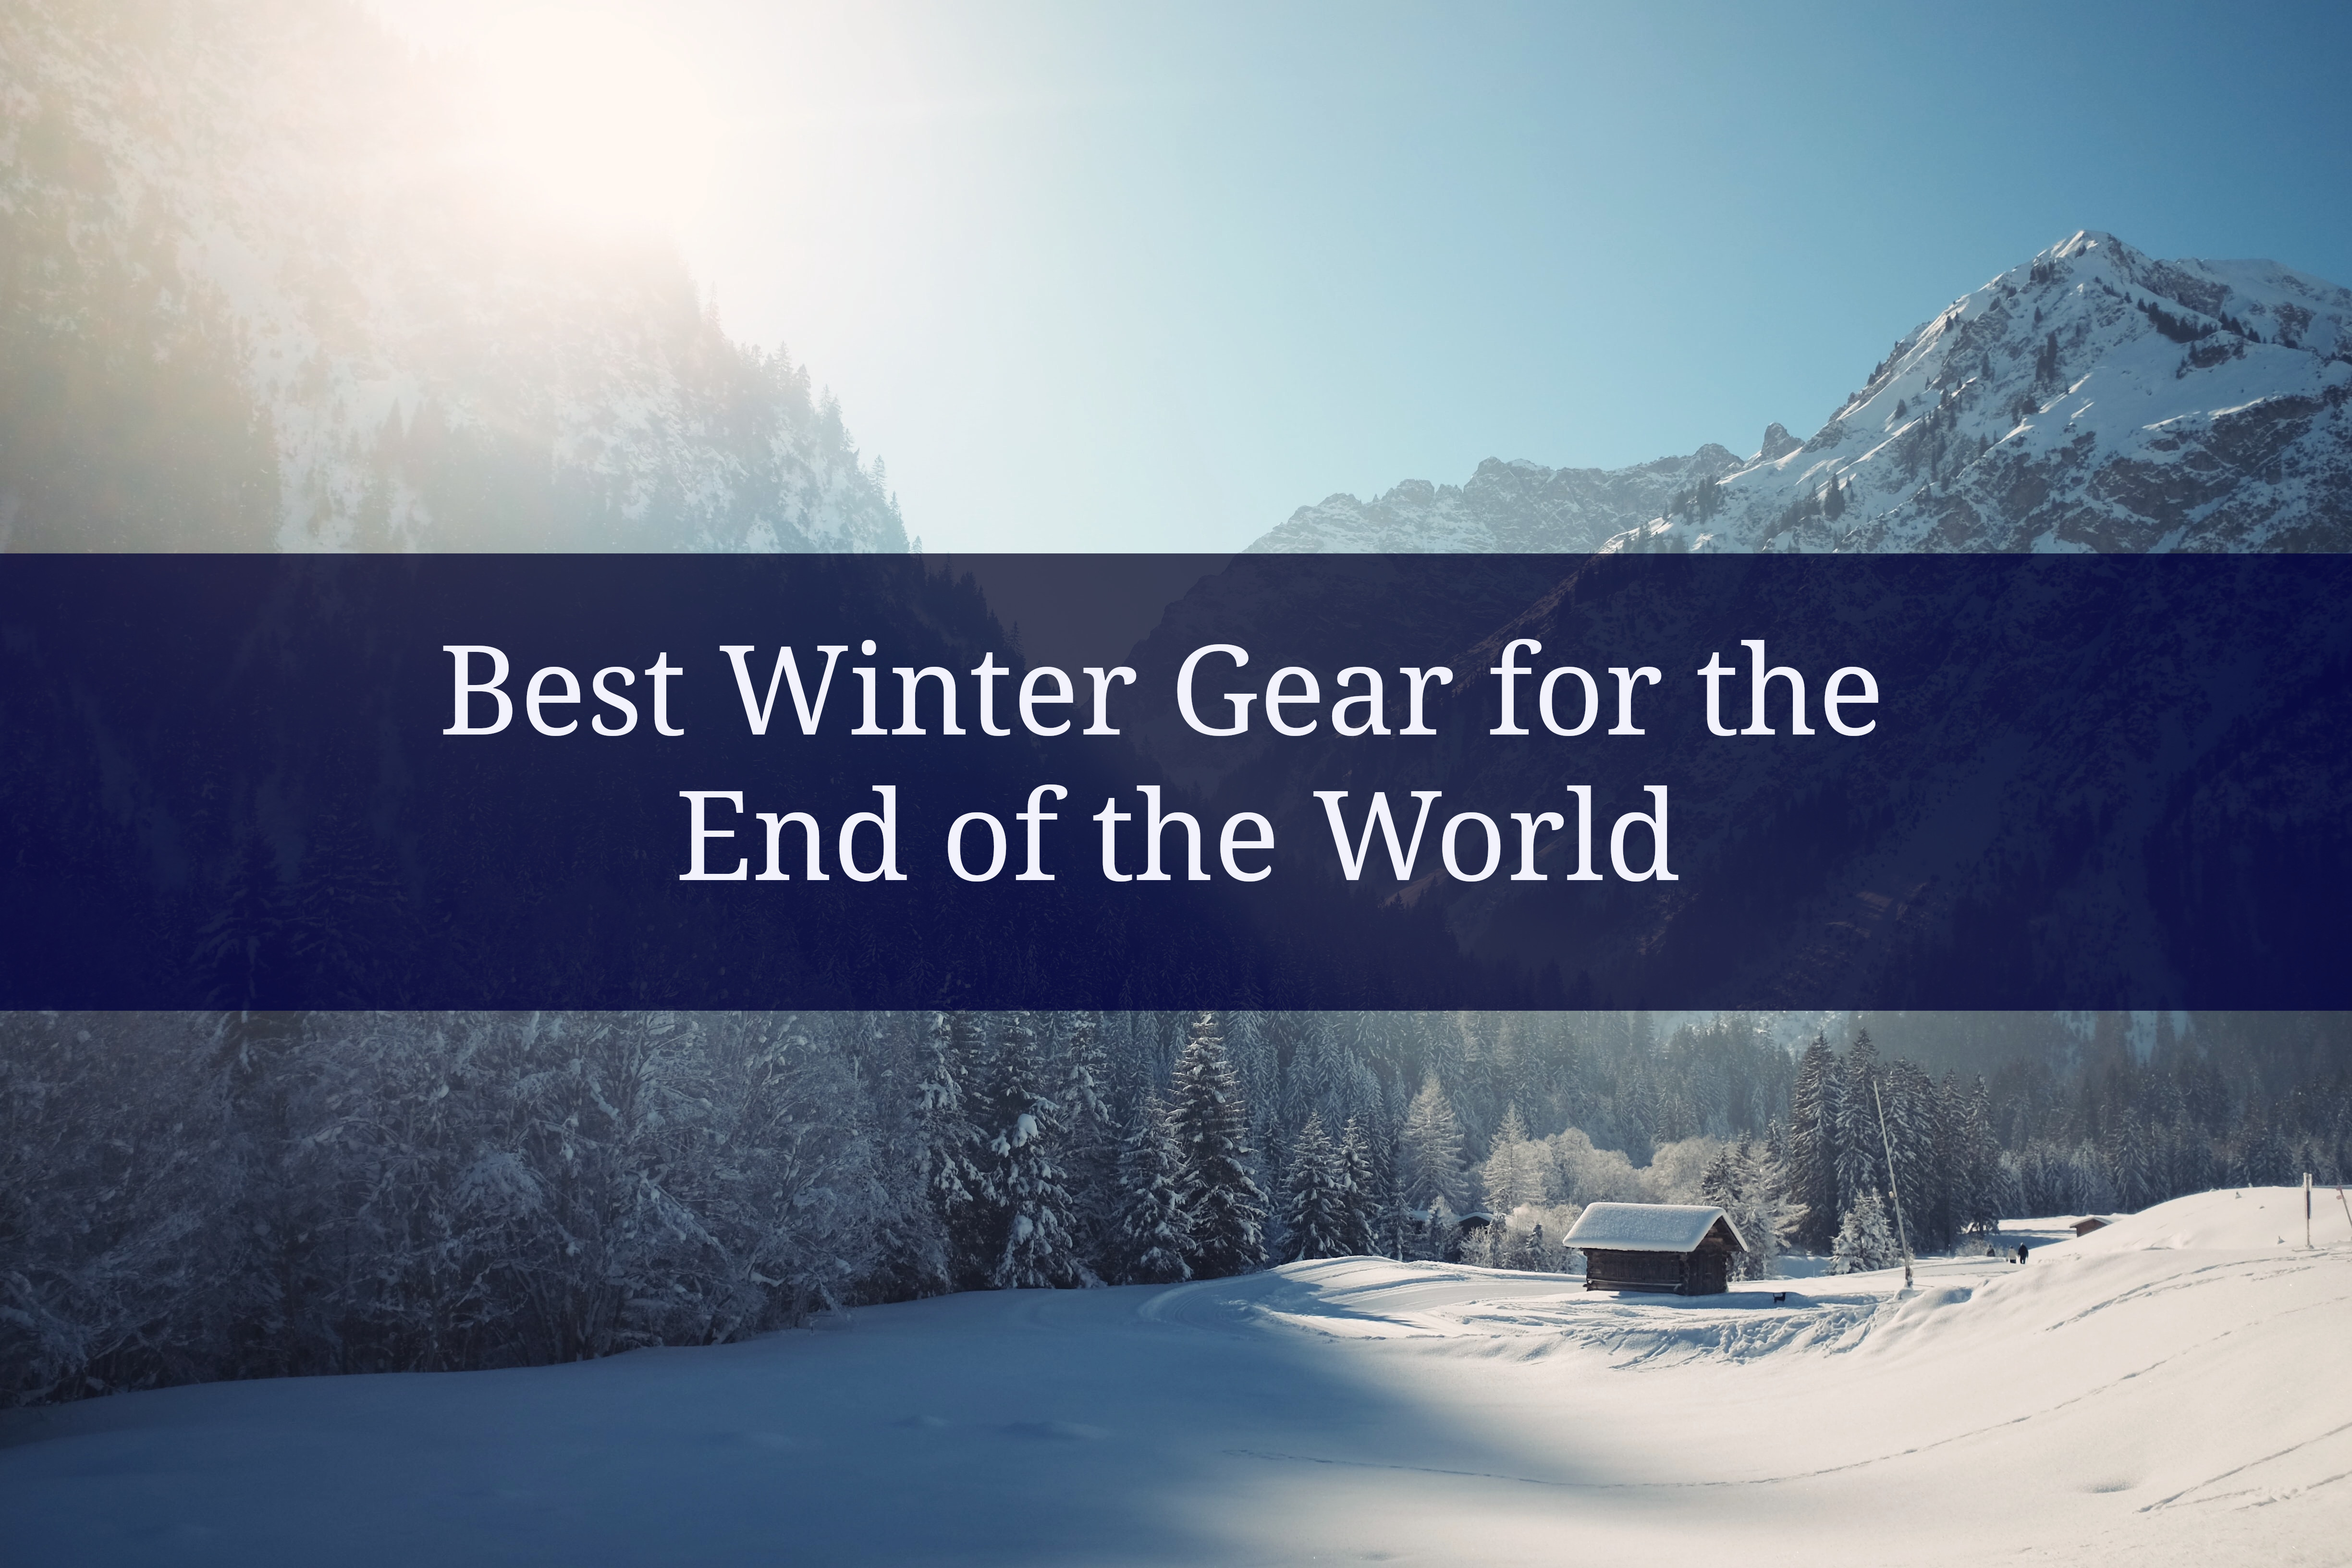 Best Winter Gear for the End of the World